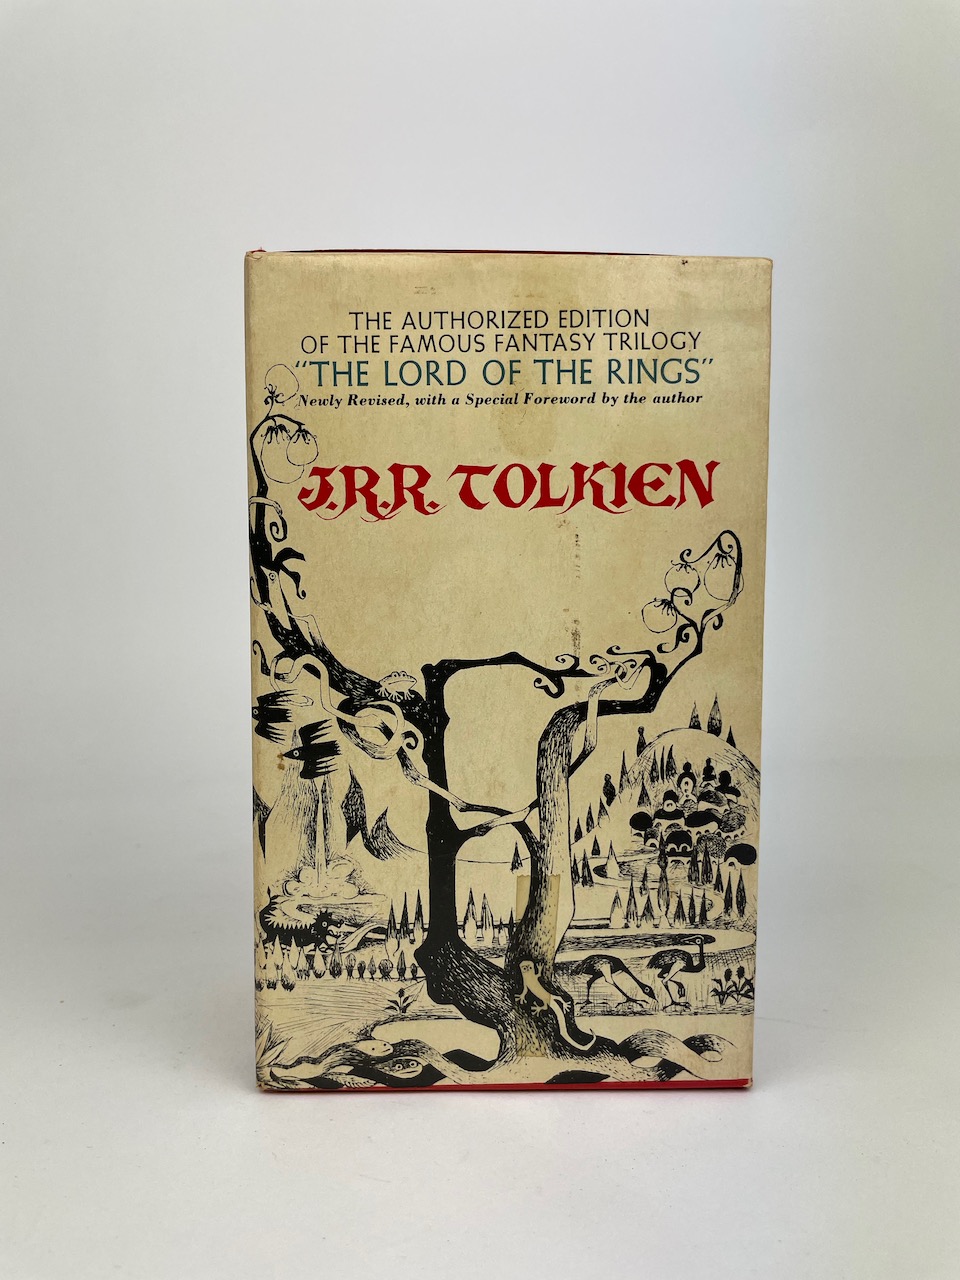 The Lord of the Rings from 1968, Authorized Edition in Black, White and Red Publishers Slipcase 2